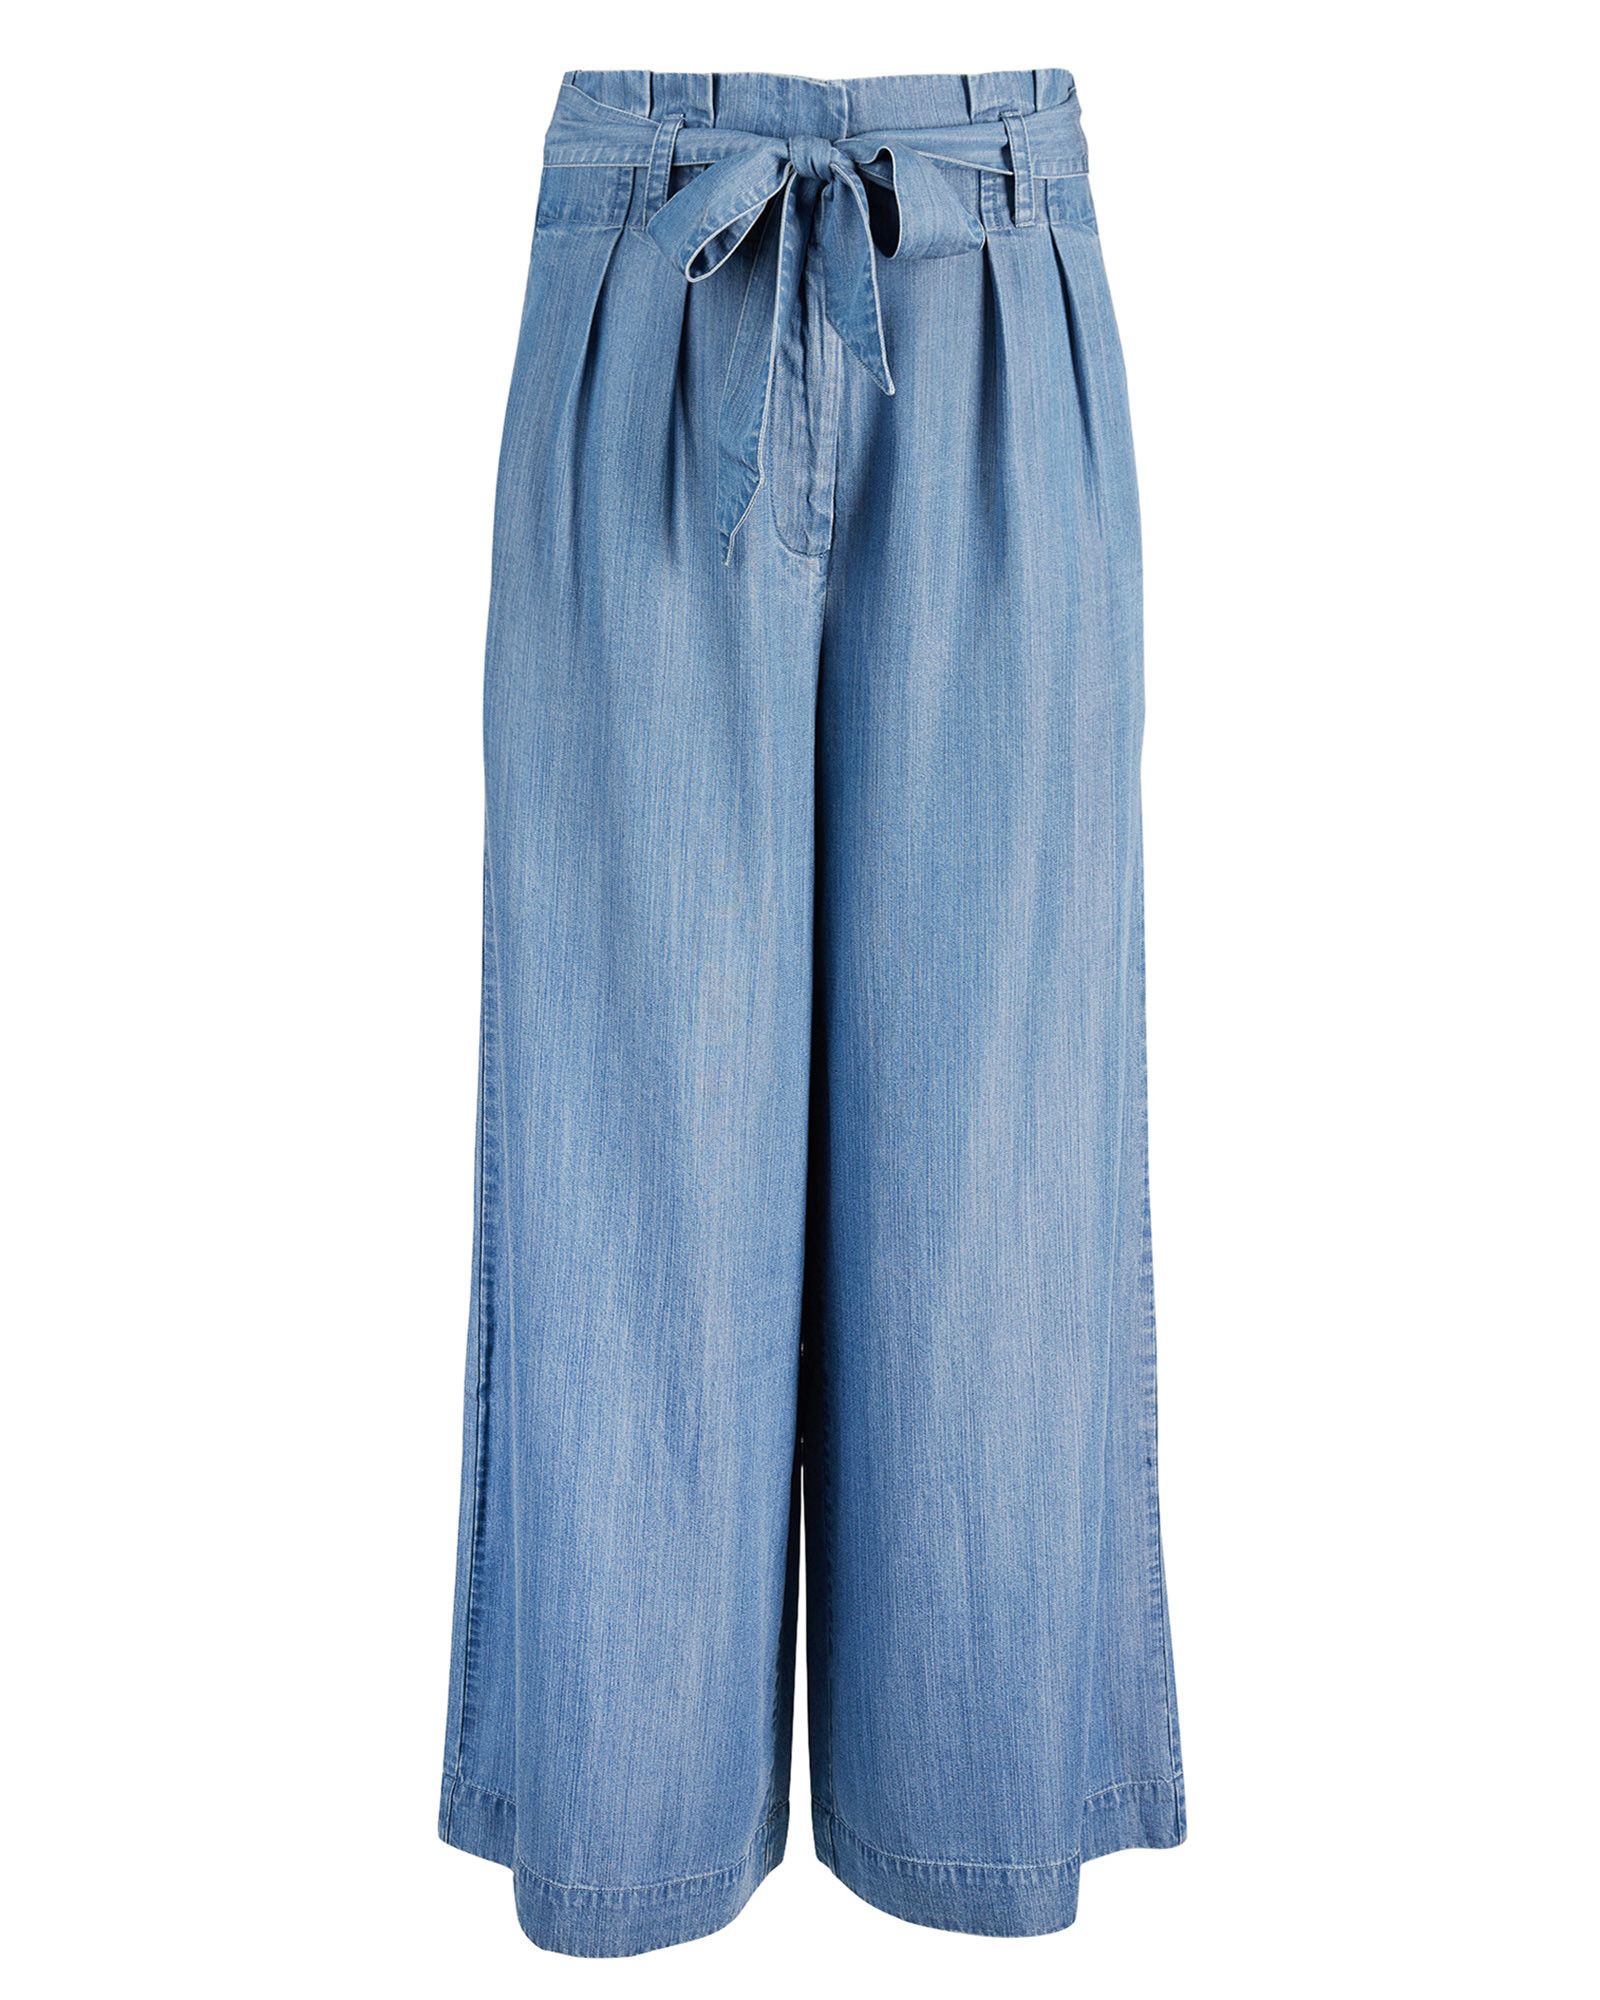 Shop Paperbag StraightLeg Jeans for Women from latest collection at  Forever 21  483648